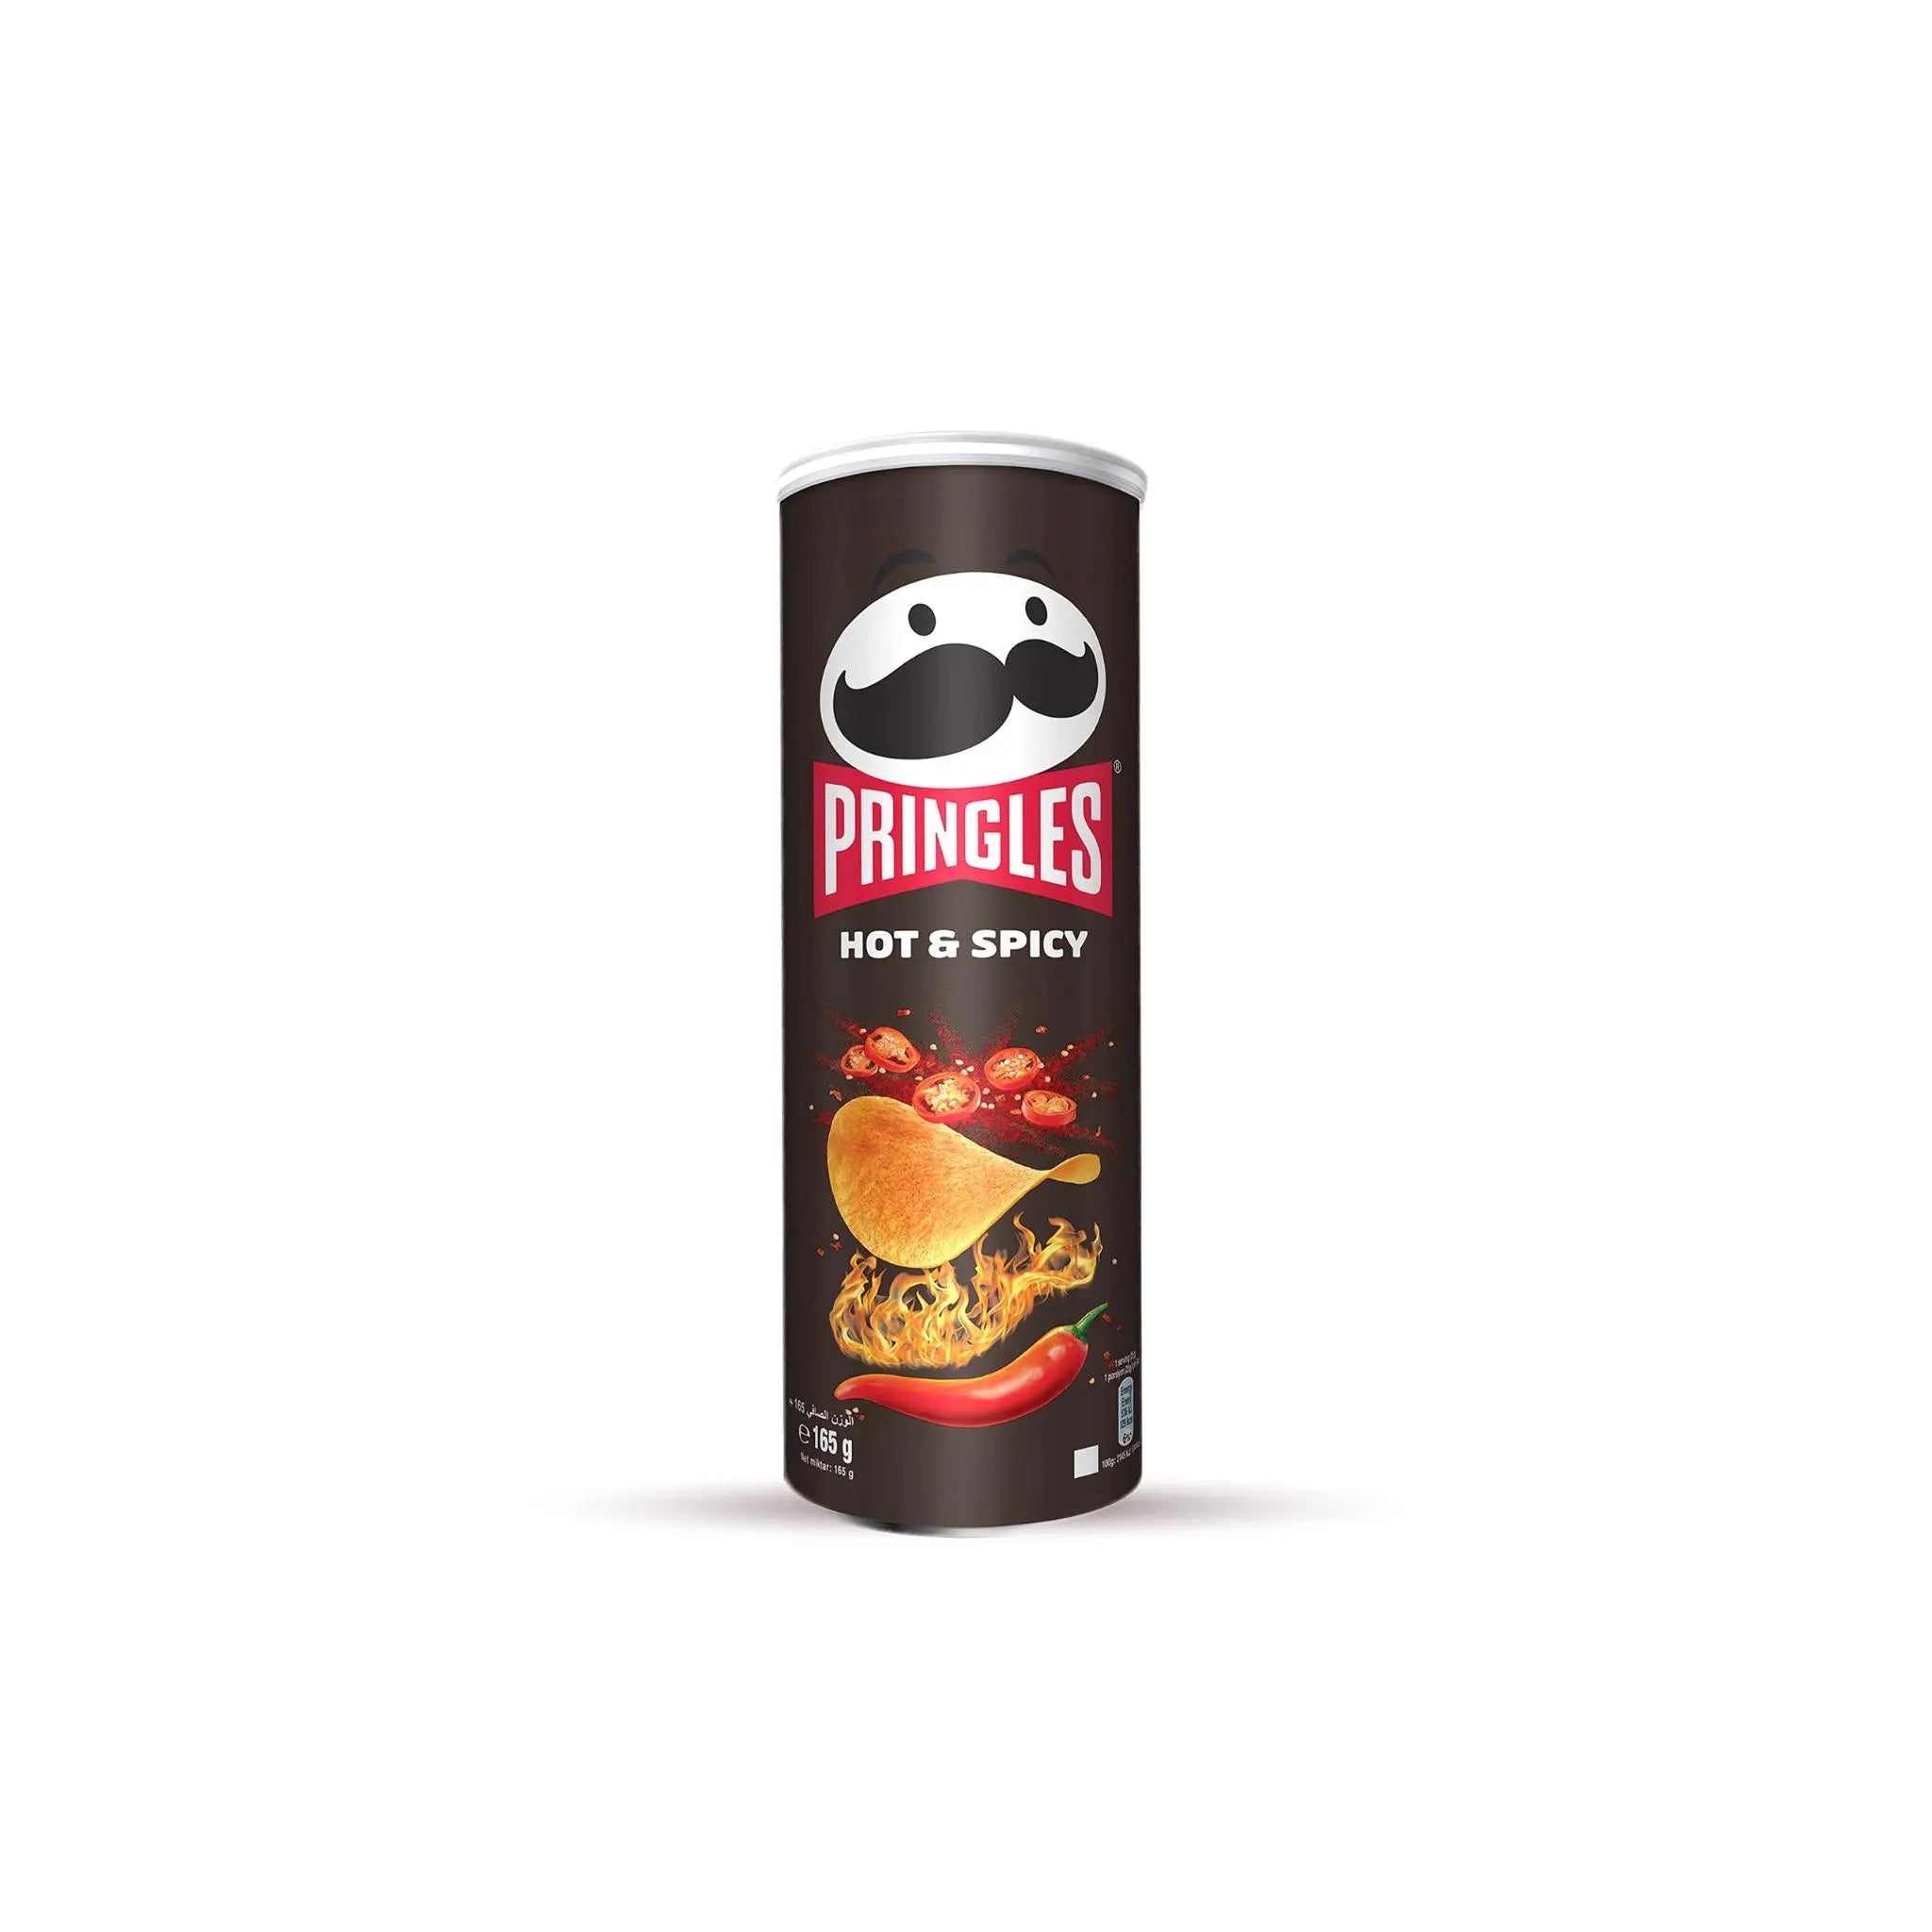 Pringles Hot & Spicy Flavored Chips Can 19X165G Pringles